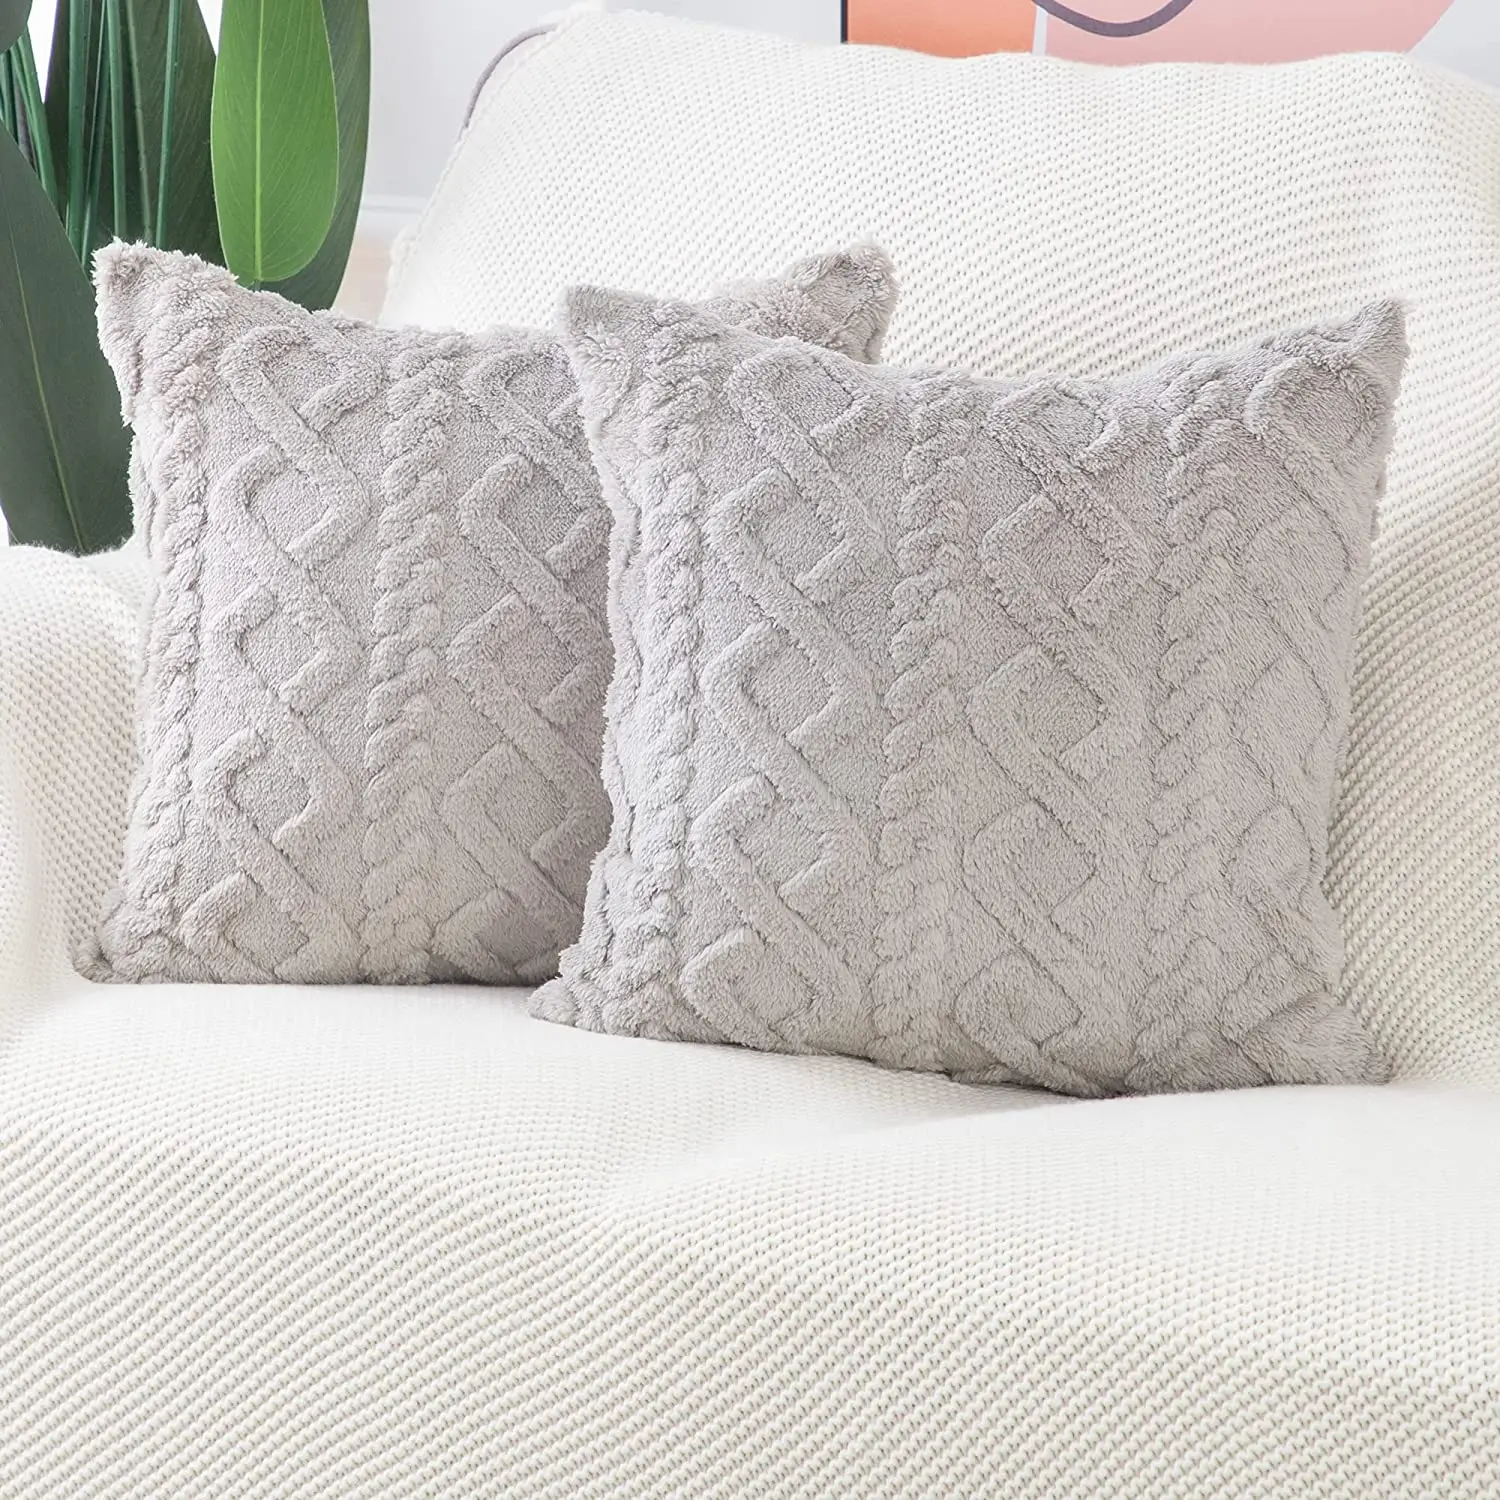 White Decorative Pillows For Sofa Fluffy Soft Solid Color Cushion Cover Home Decor The Plaid Throw Pillow Cover Geometric Pillow